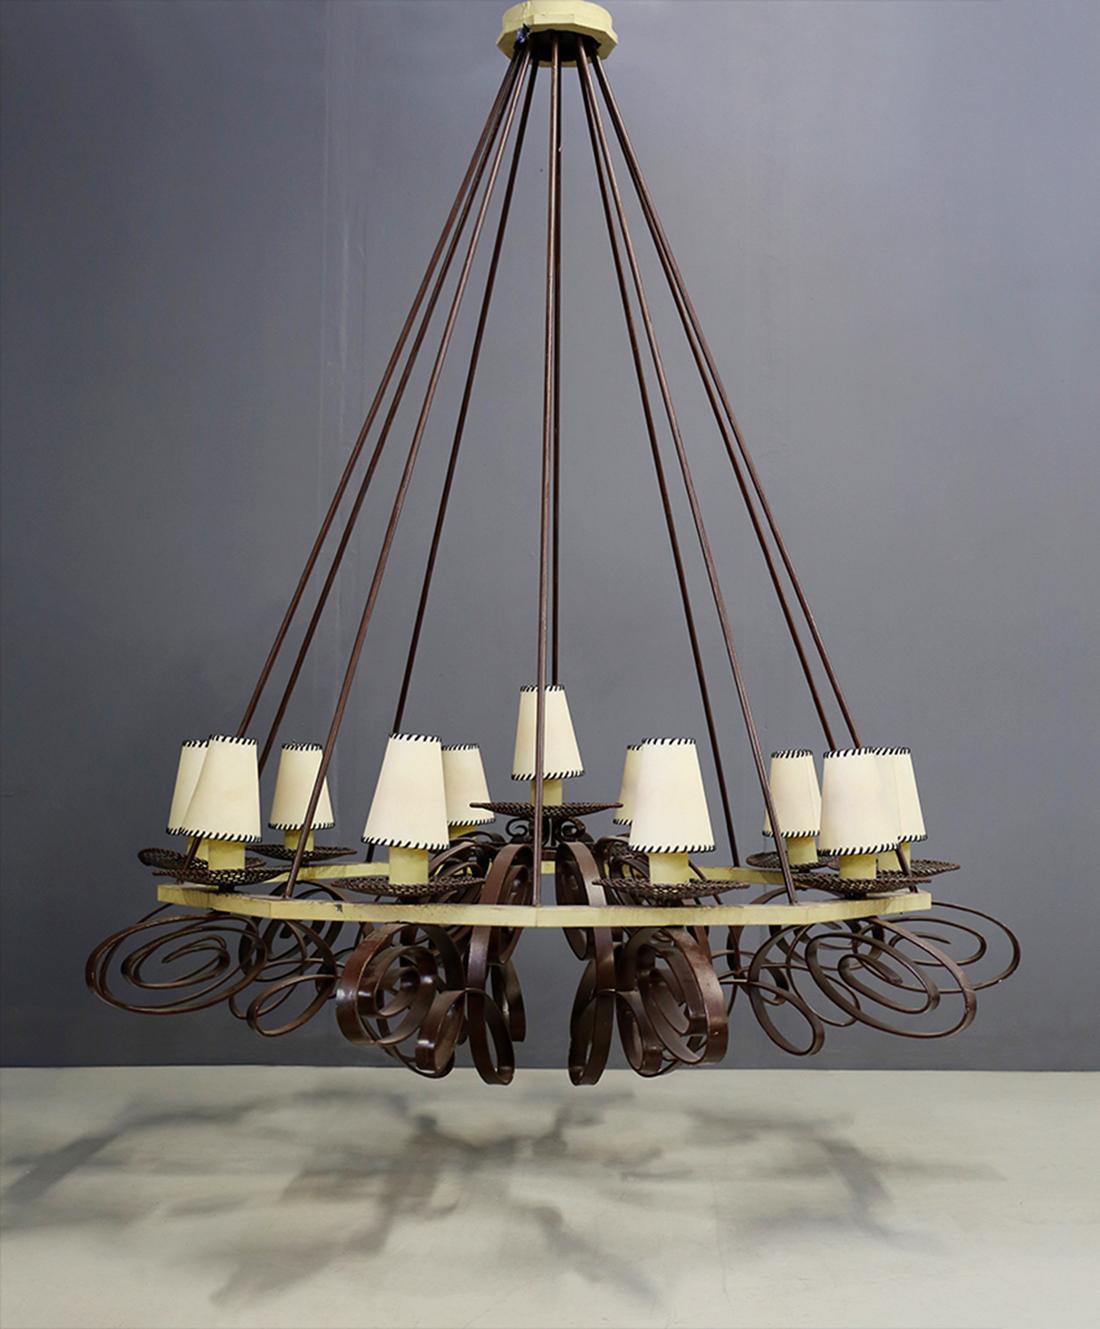 Impressive and large French ceiling chandelier from the early 1940s. Made in Art Deco style with a painted metal frame. The structure is truly imposing and grand. Pyramidal in shape with curved metal decorations at the base in the shape of a purely